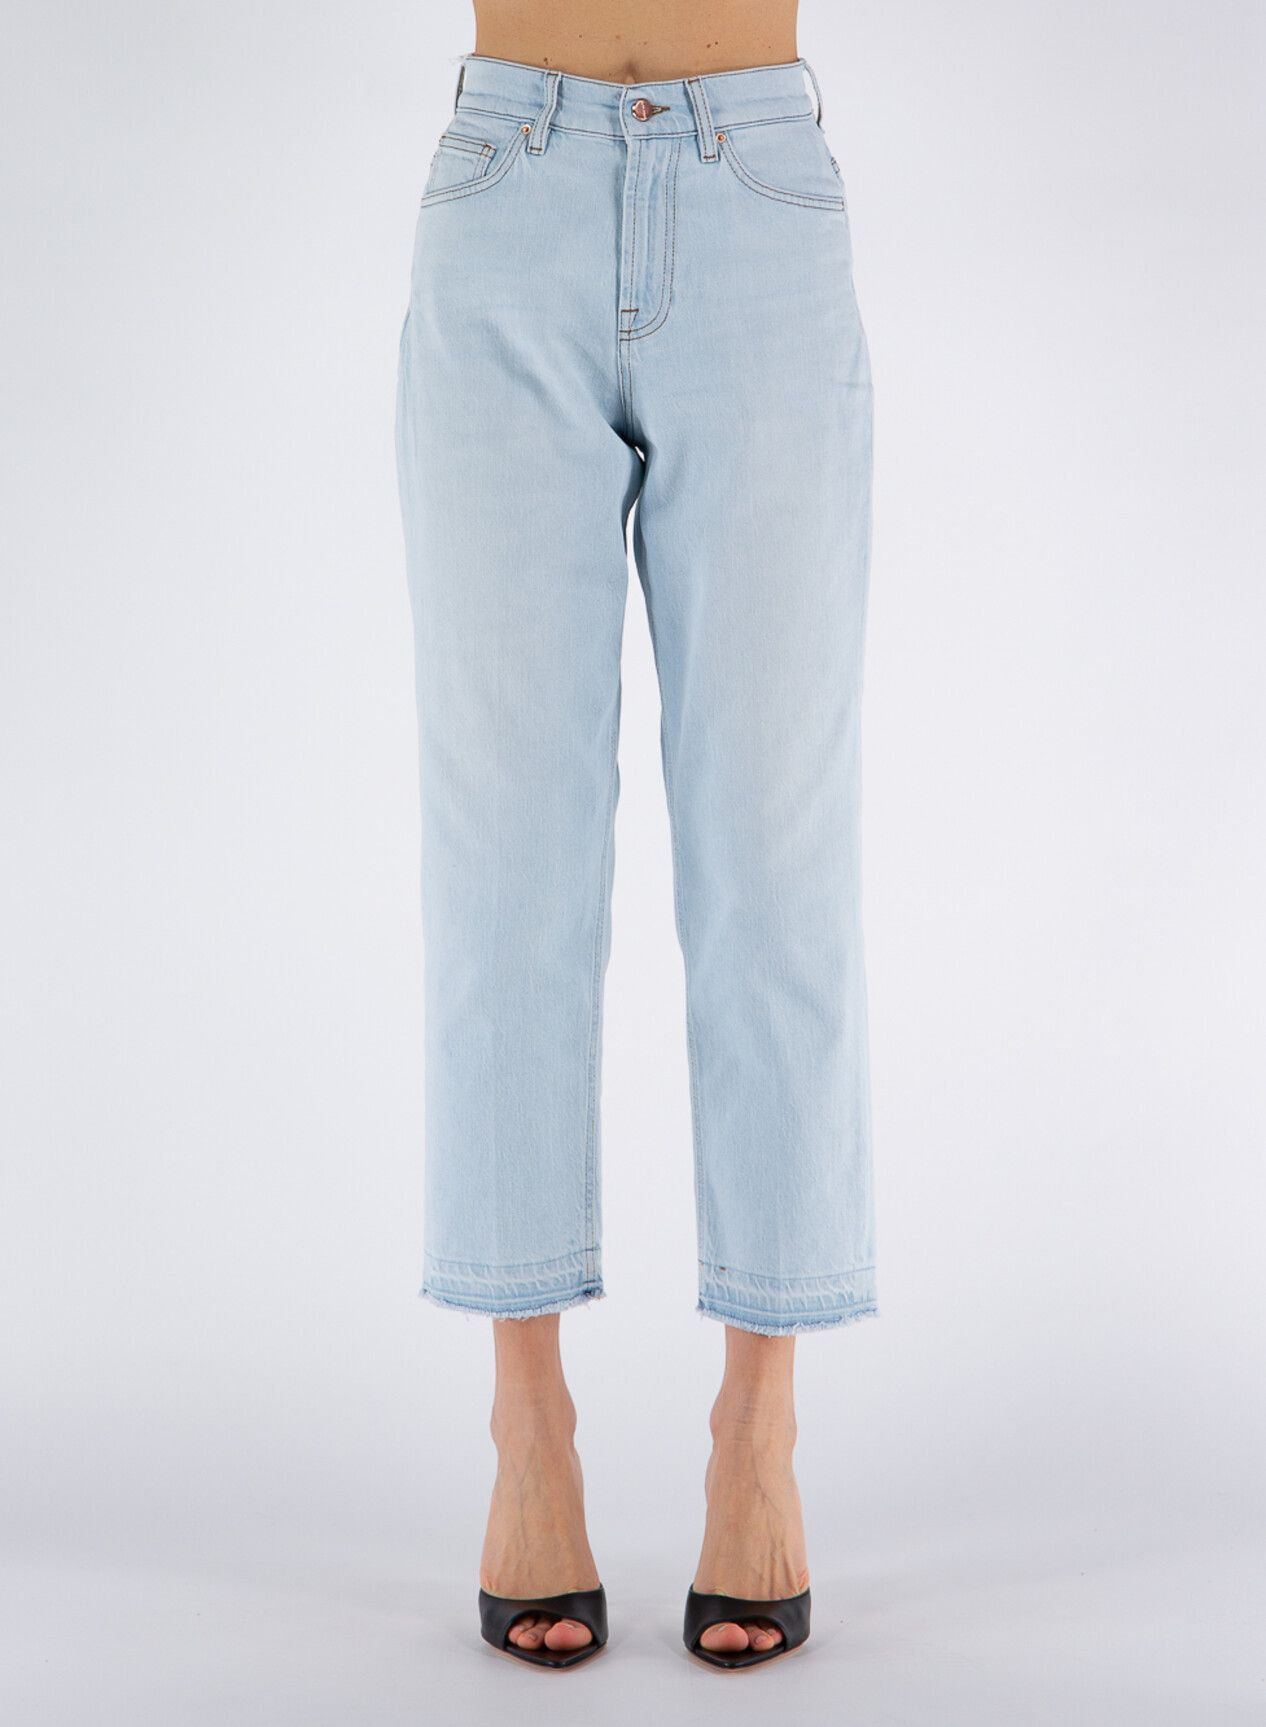 Don The Fuller Chic High-Waist Jeans for Sophisticated Elegance